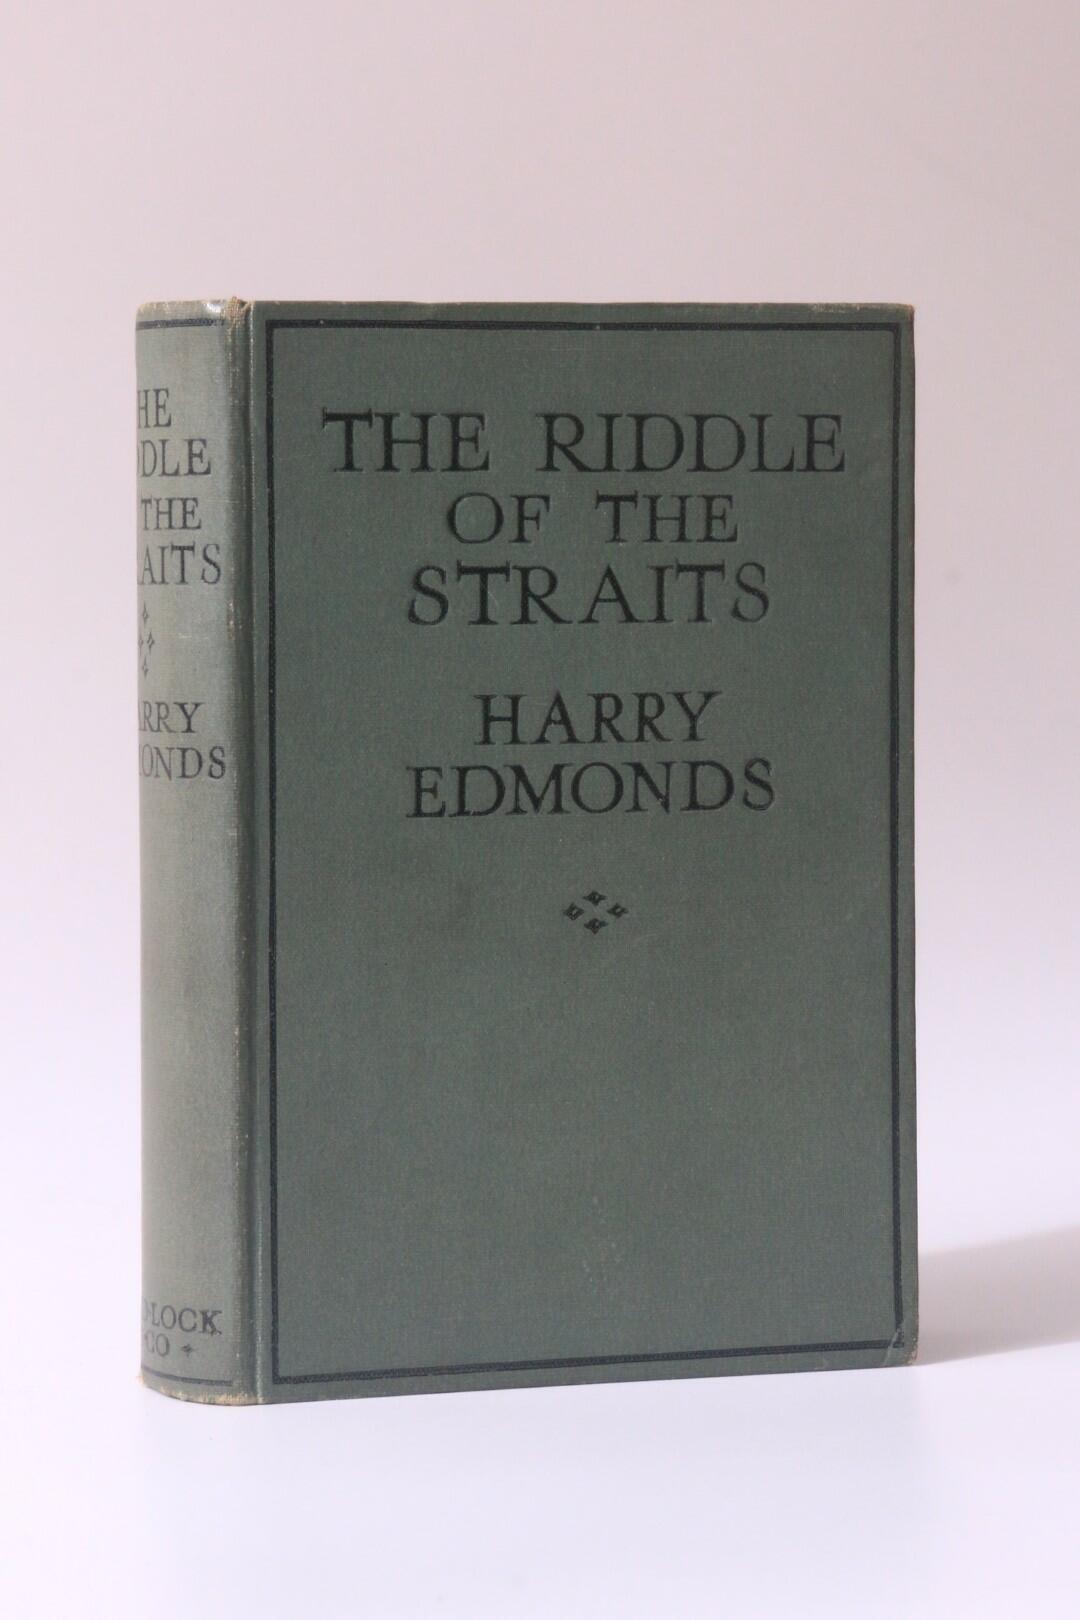 Harry Edmonds - The Riddle of the Straits - Ward, Lock & Co., 1931, Signed First Edition.